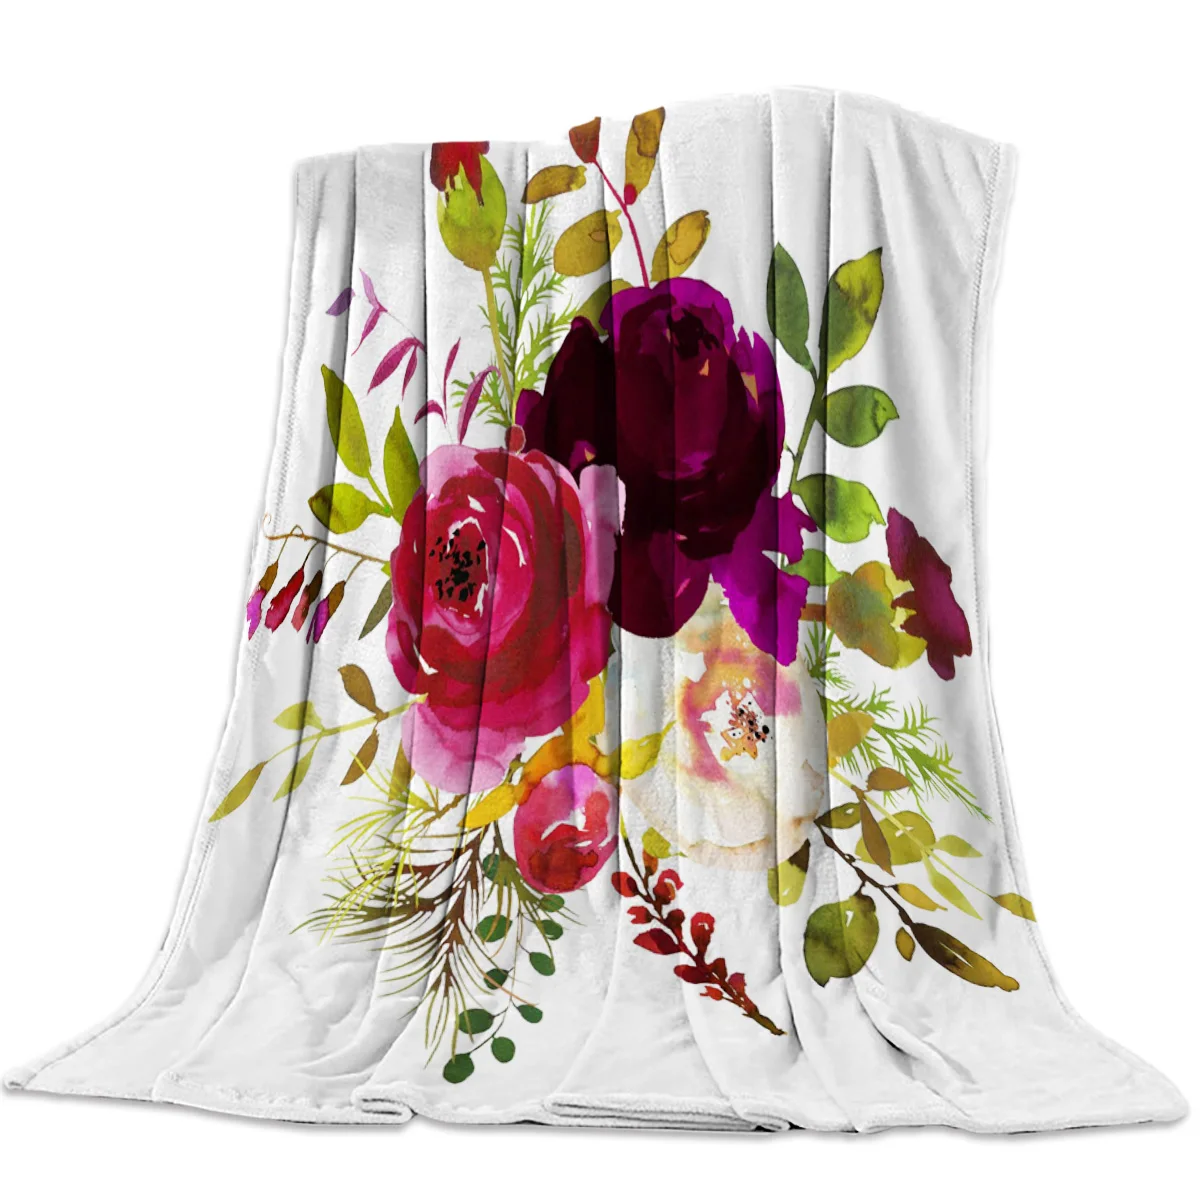 

Peony Flower Blanket Bed Cover Flannel Fleece Cover Wrap Personalized Durable Soft Warm Chair Hall Home Blankets Throws Travel